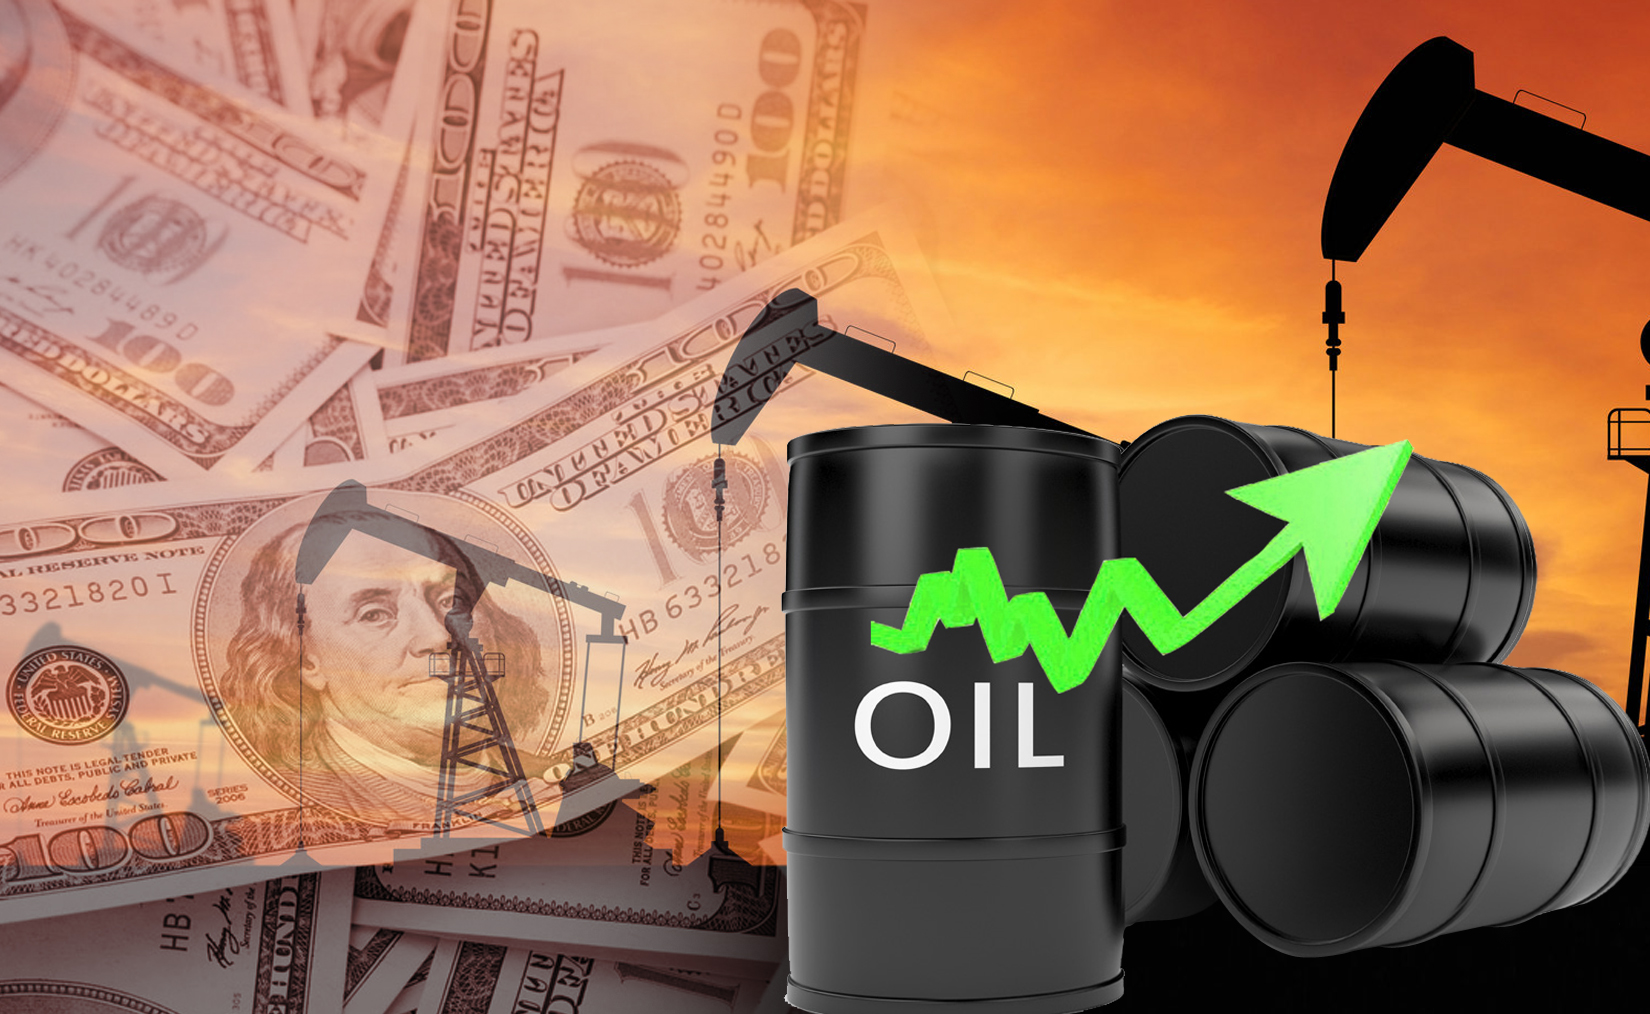 Kuwait oil price up 39 cents to USD 48.56 pb                                                                                                                                                                                                              